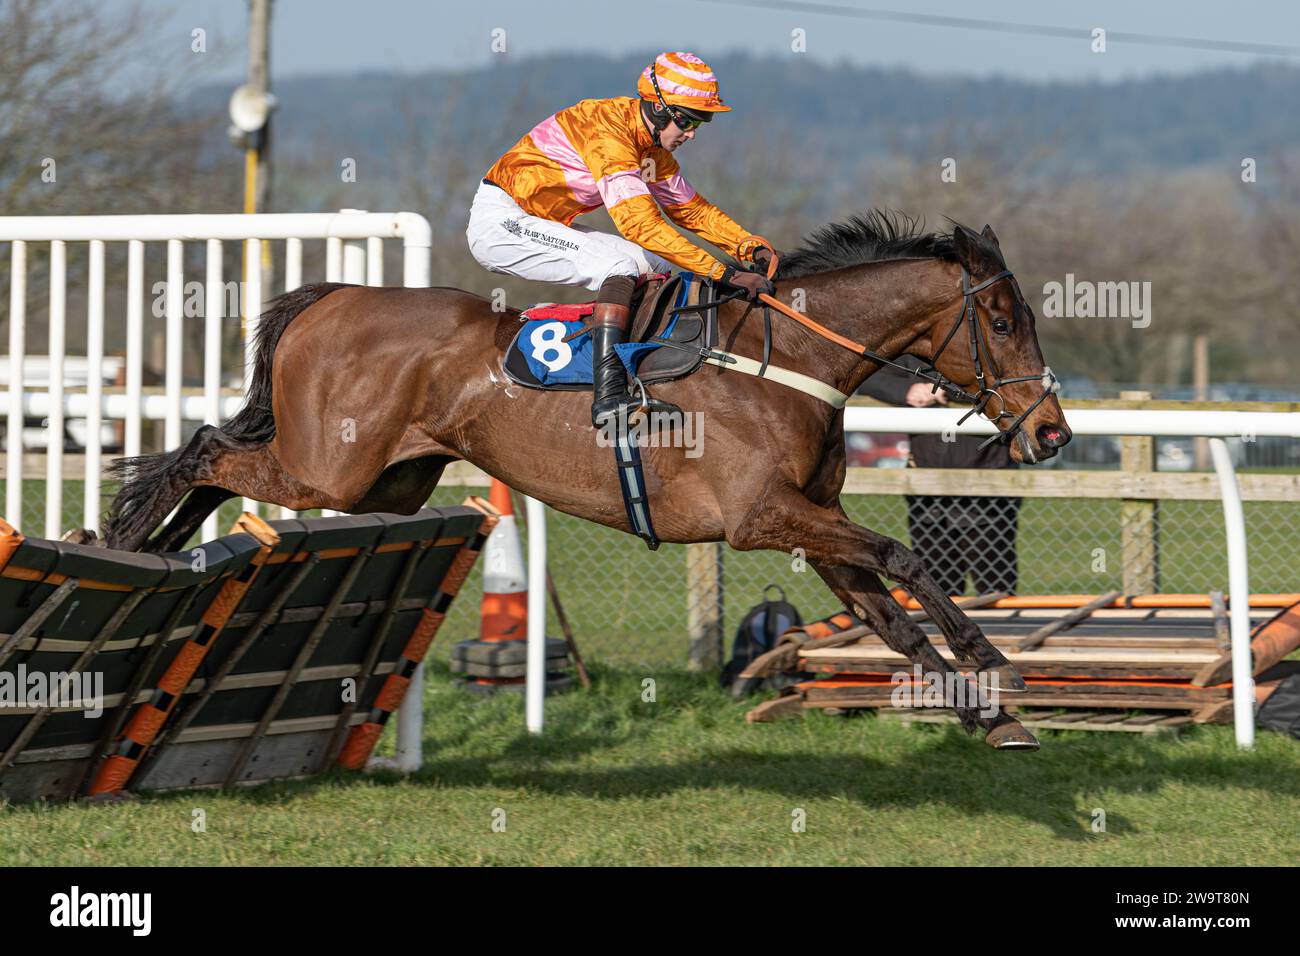 Name in Lights, under jockey Brendan Powell, clears the hurdle to go on and win the 4th race at Wincanton, March 21st 2022. Trained by Colin Tizzard. Stock Photo